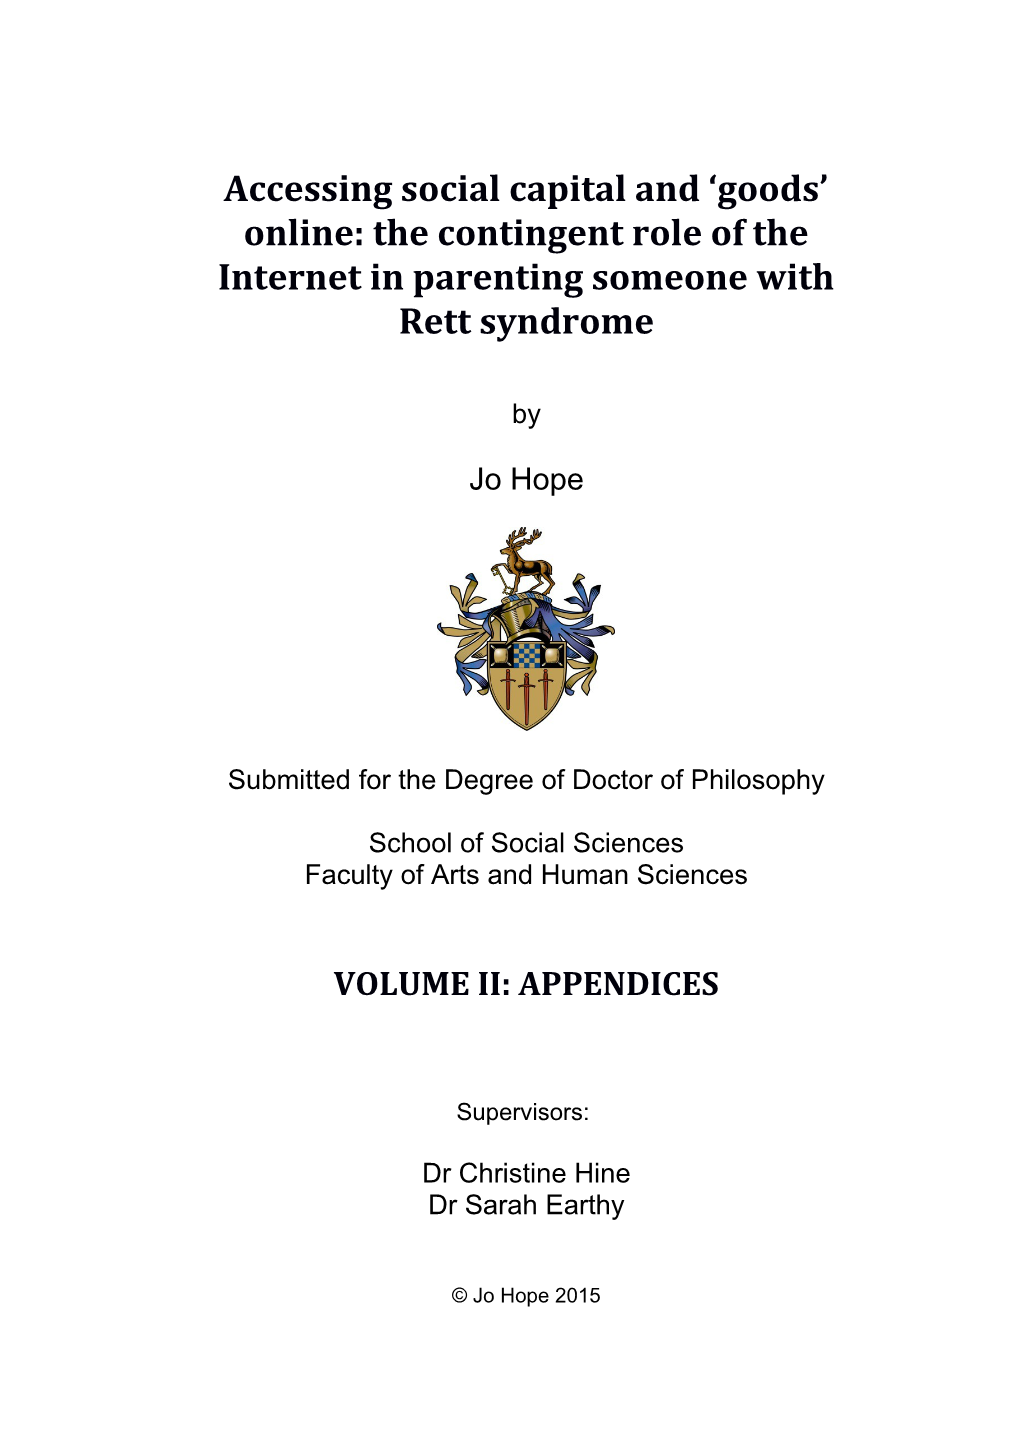 Submitted for the Degree of Doctor of Philosophy